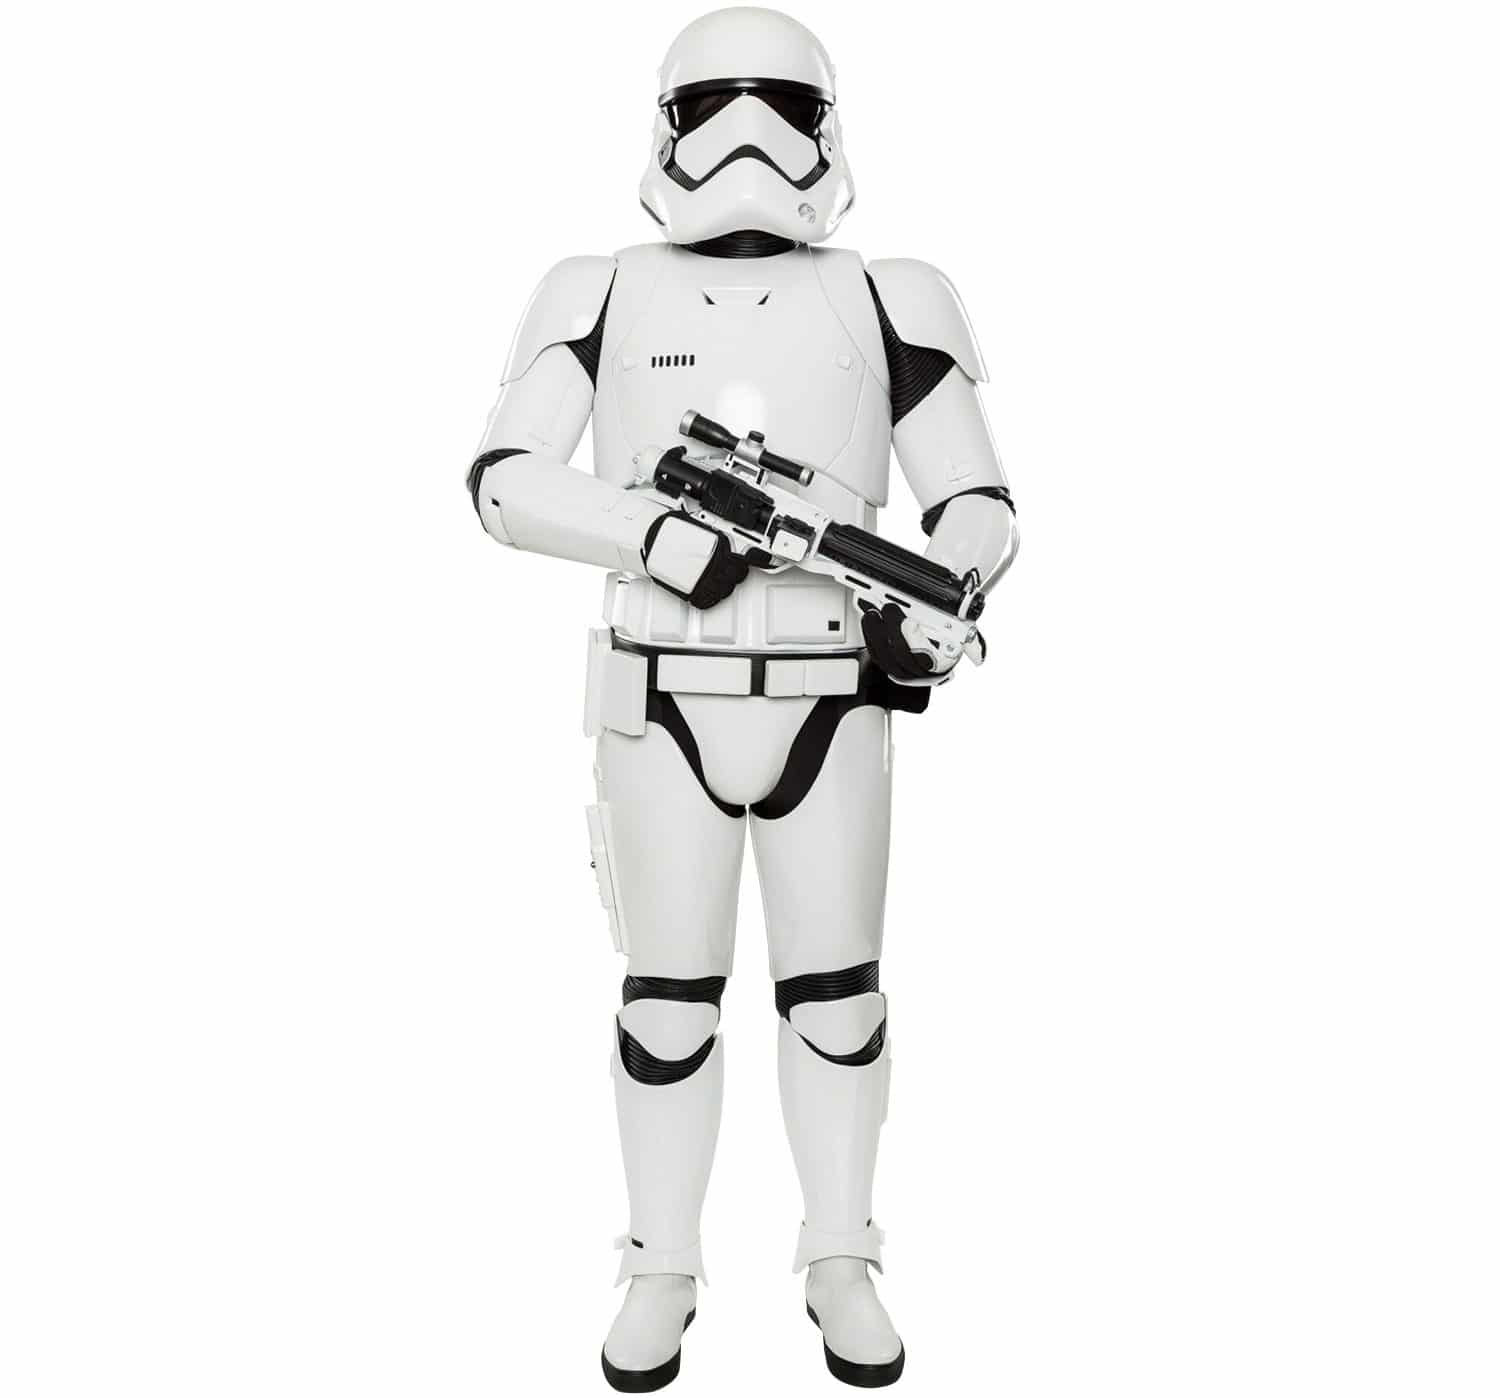 Stormtrooper Latex Suit Porn Video - First Order Stormtrooper Armour Now on Sale | eTeknix